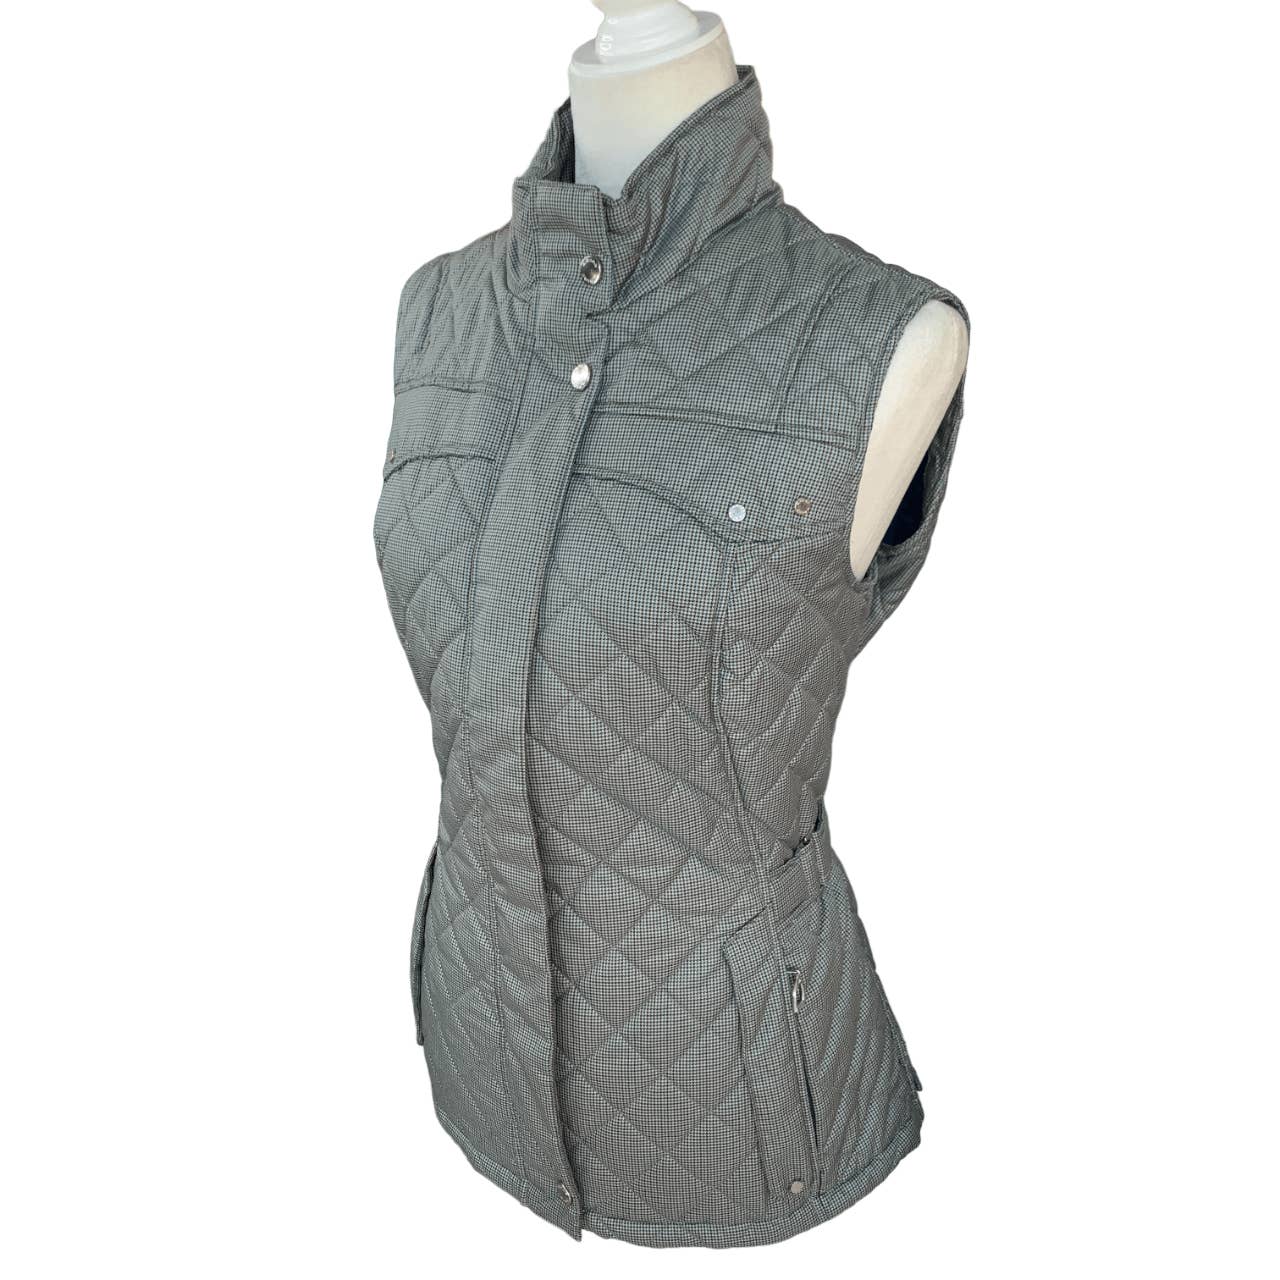 Ariat Quilted Riding Vest in Grey - Woman's X-Large